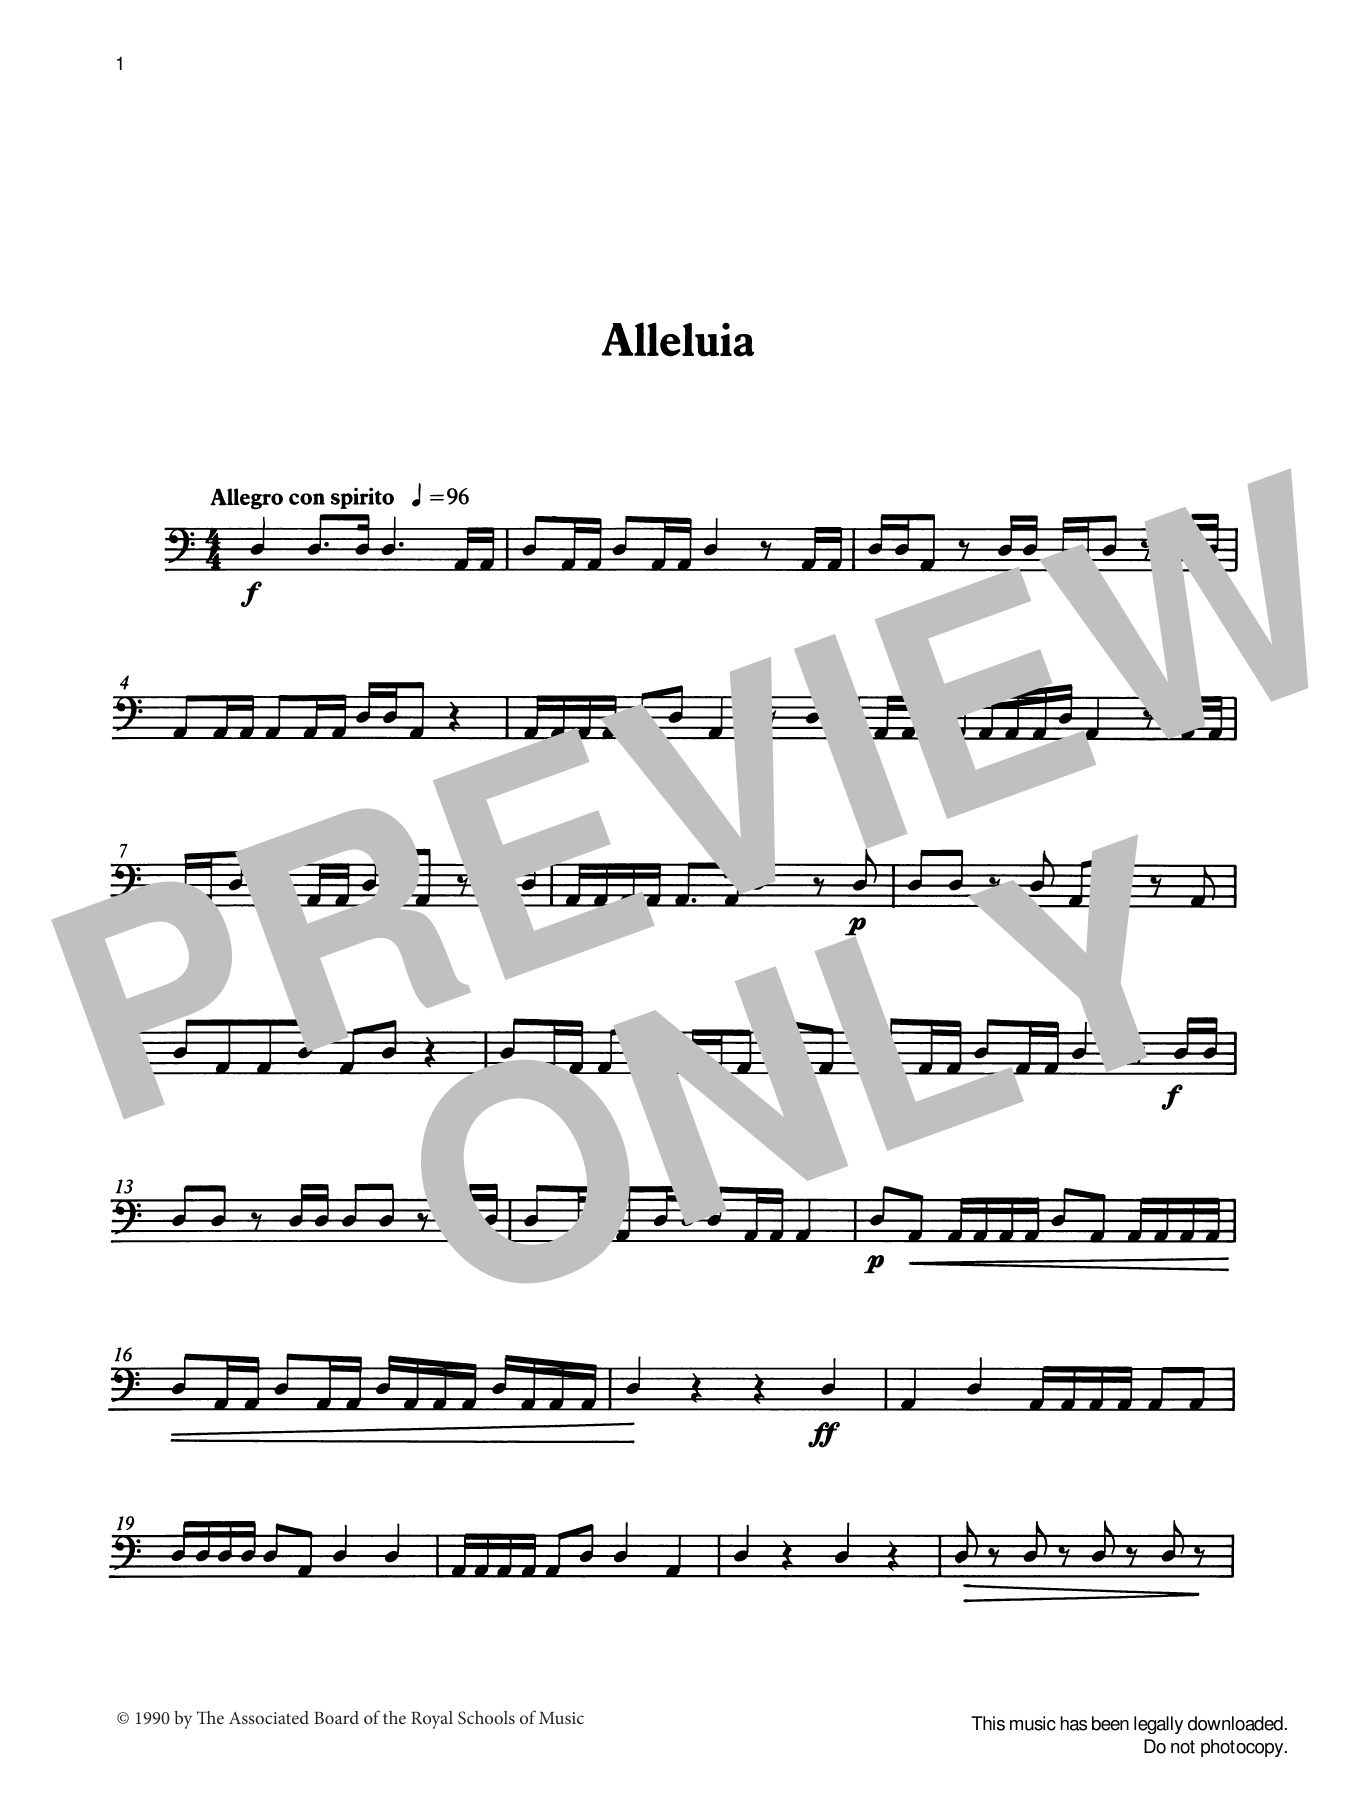 Download Ian Wright Alleluia from Graded Music for Timpani, Sheet Music